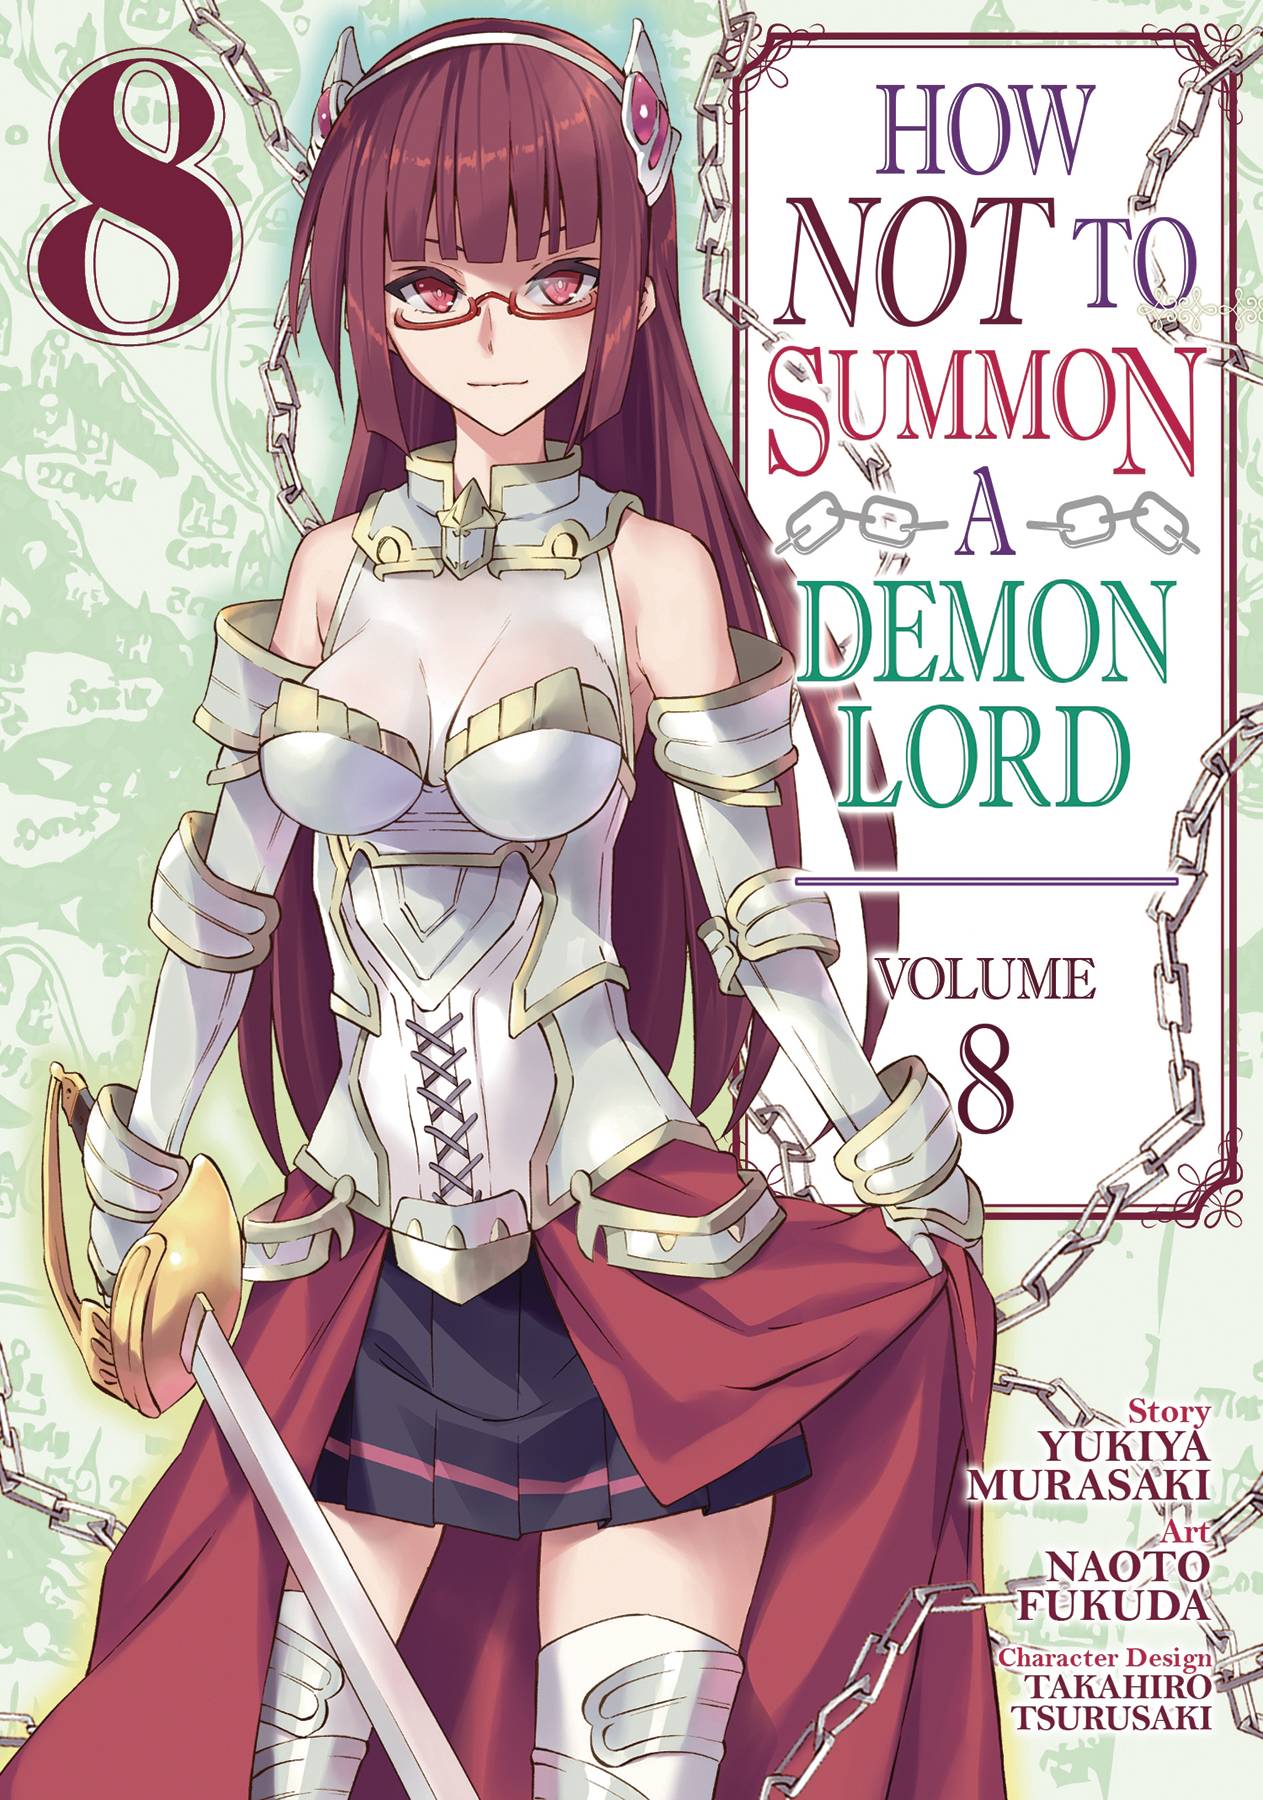 HOW NOT TO SUMMON DEMON LORD GN 08